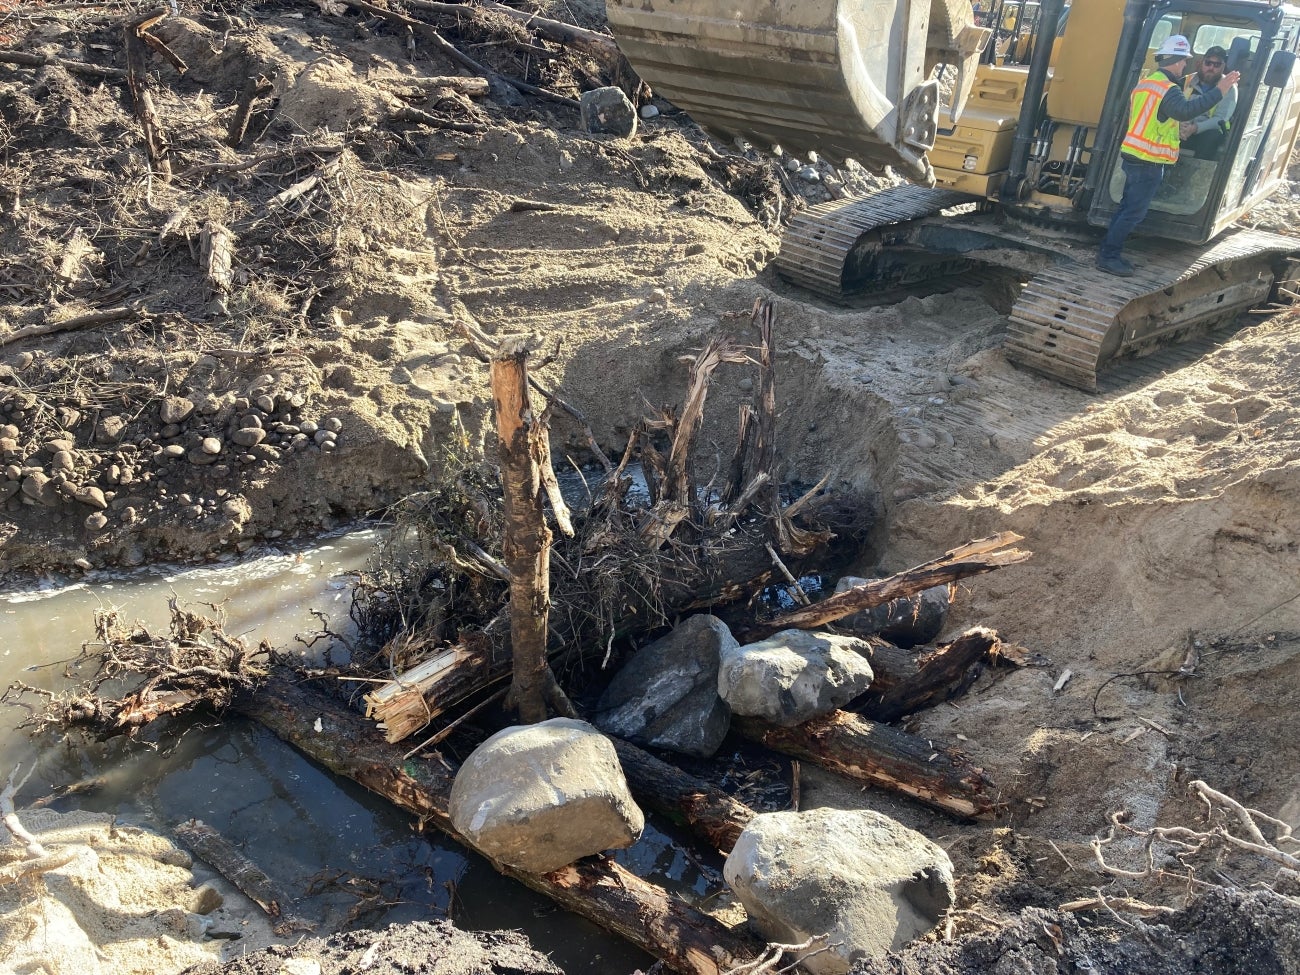 Large tree trunks with root wads are shoved into the mud along the side channel bank, with large boulders stacked on top. A backhoe is visible in the background.